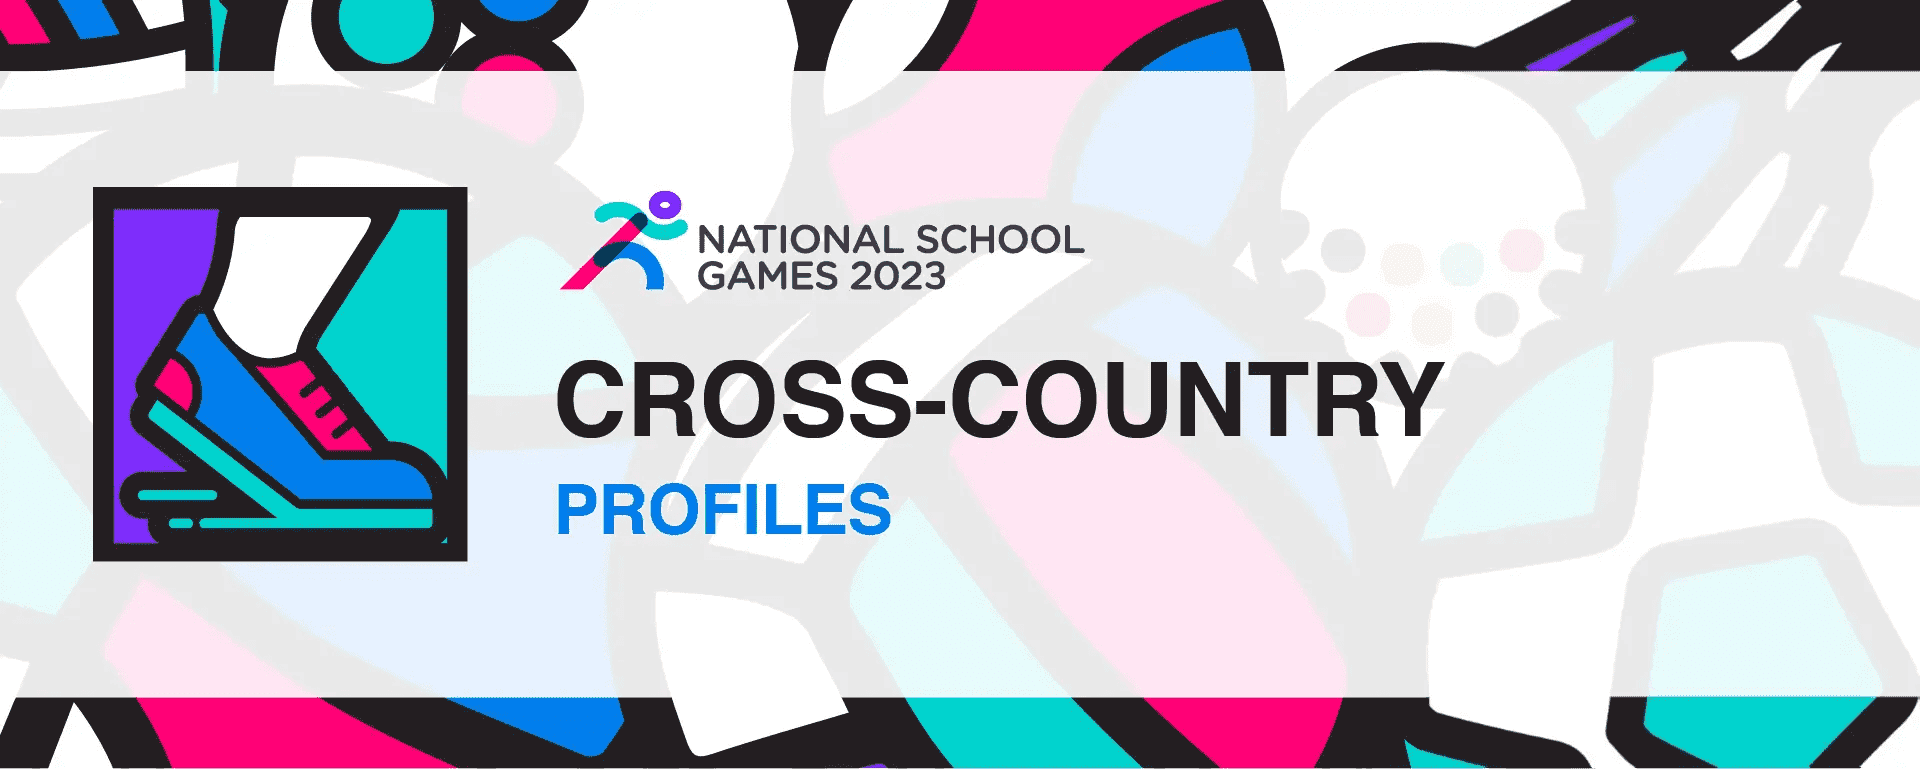 National School Games 2023 | Cross-country | Profile